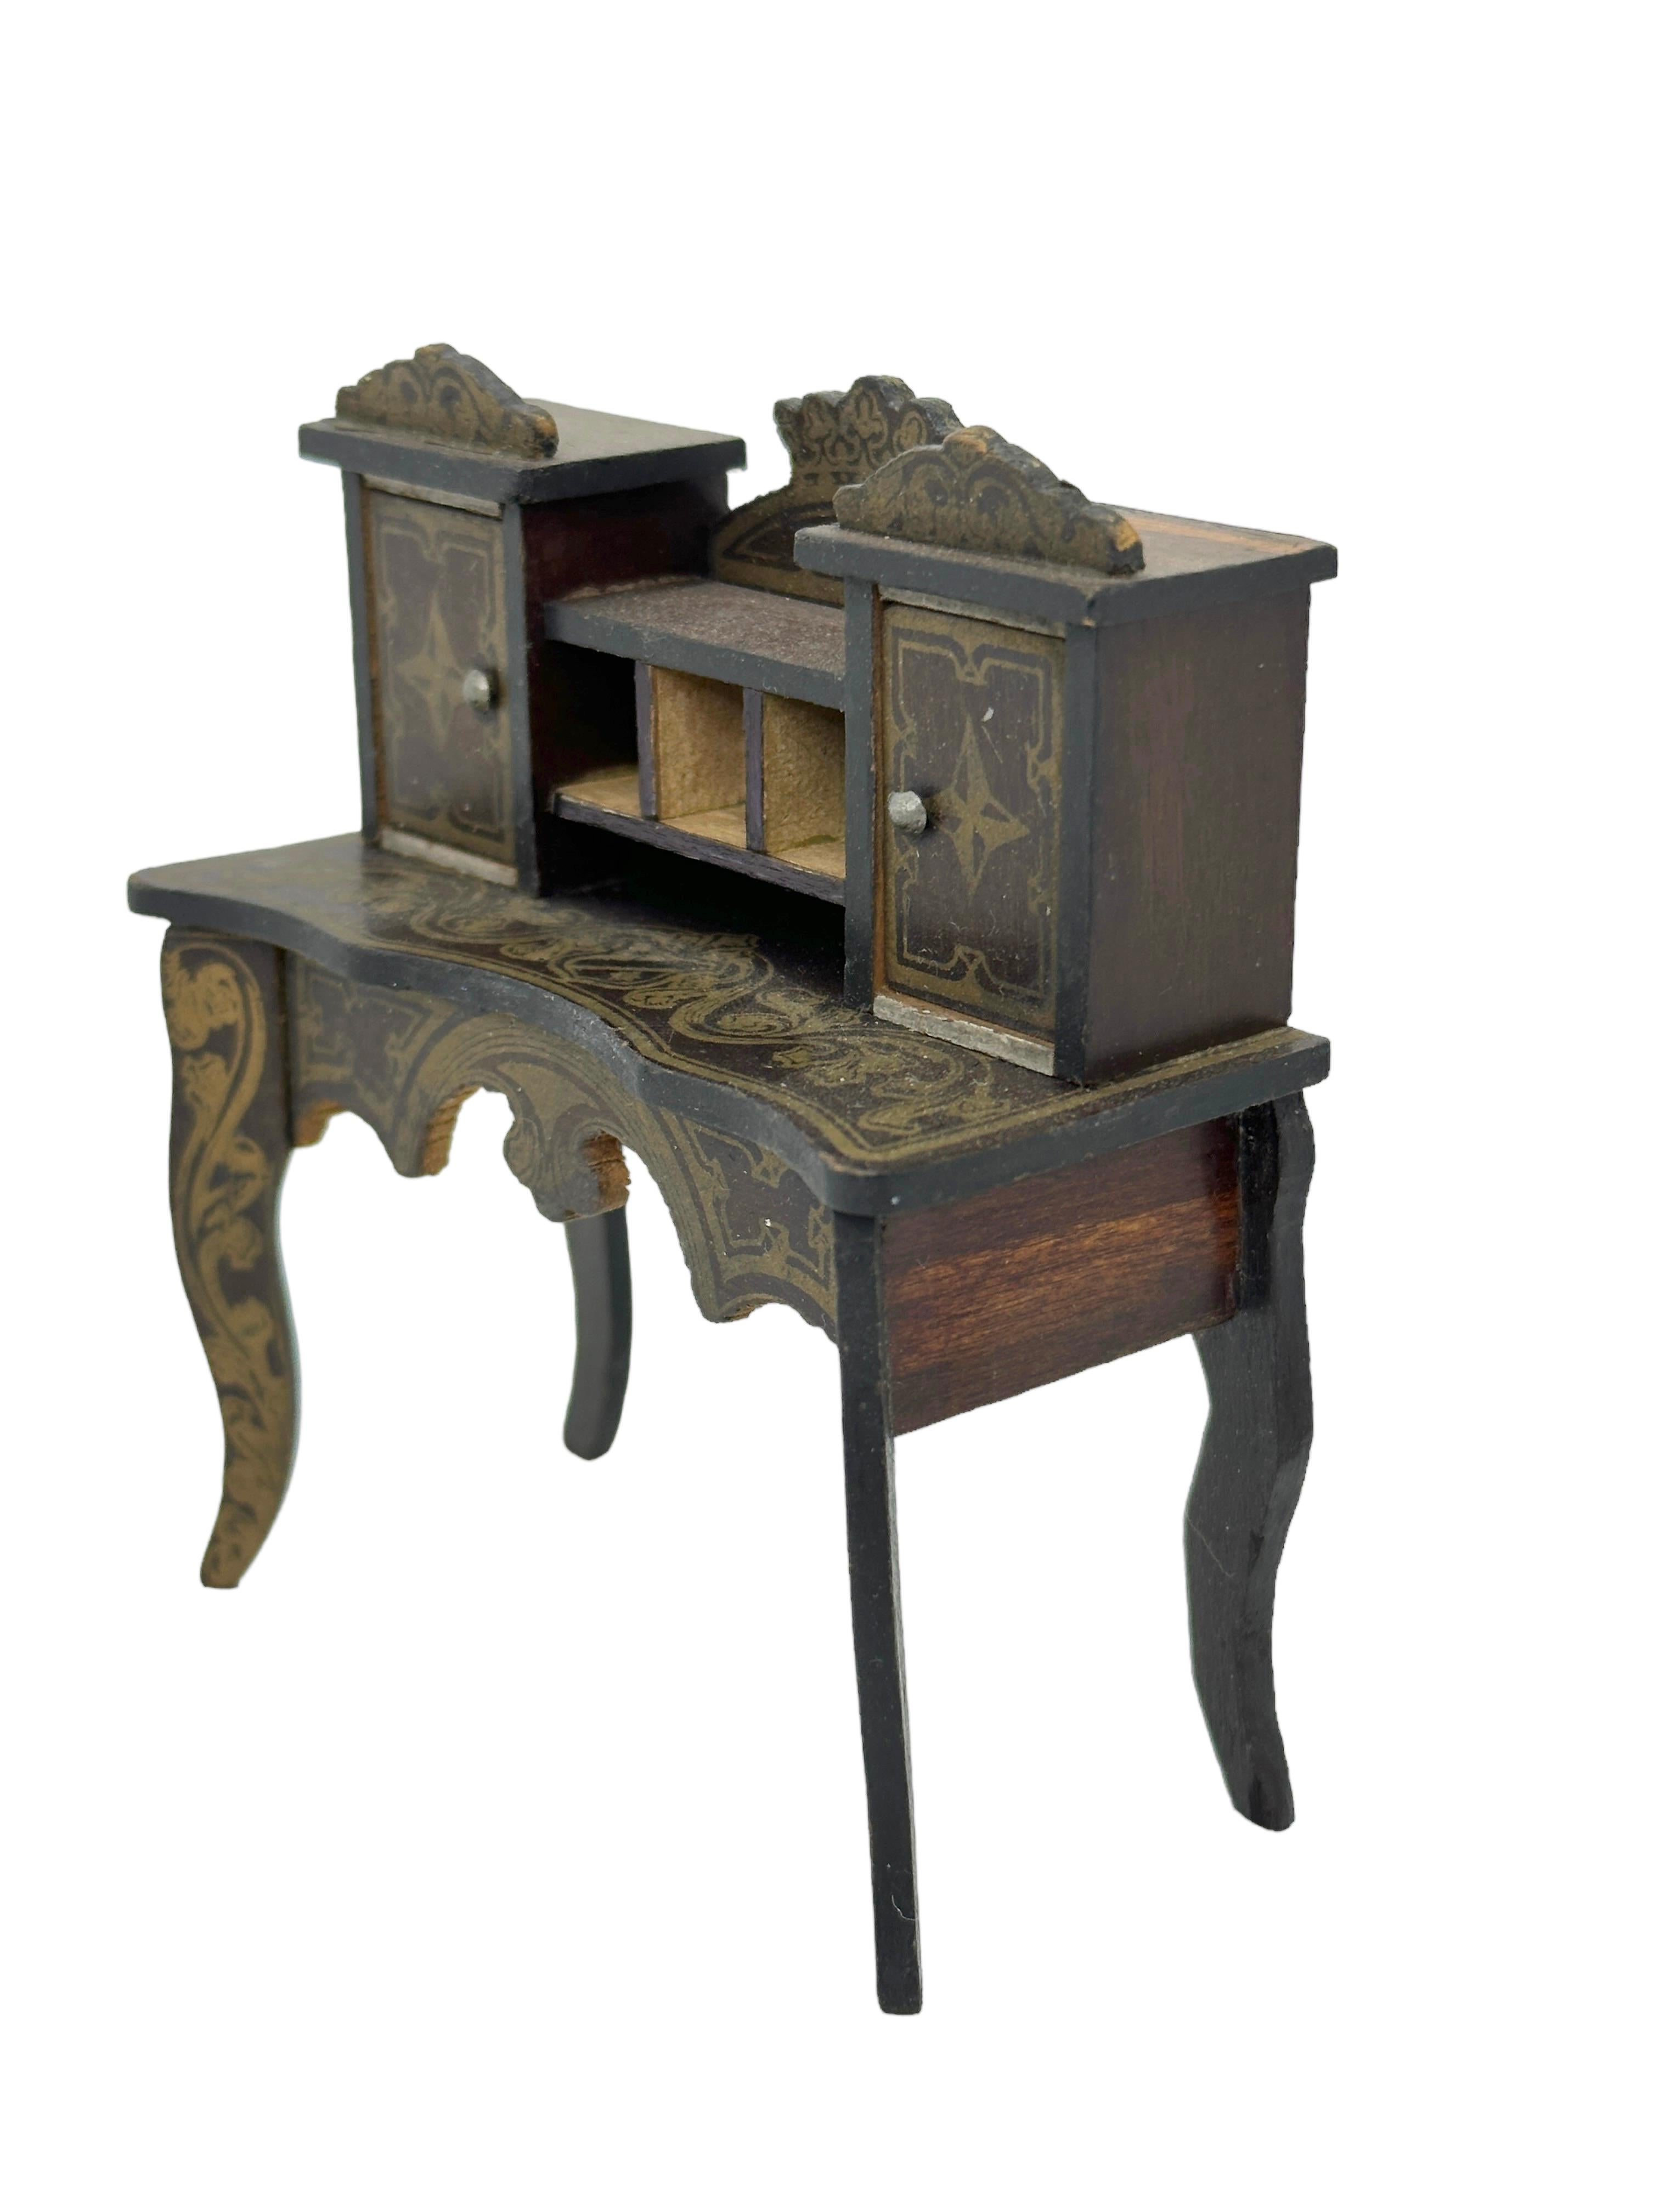 This rare and exquisite miniature antique German wooden Boule Secretary Desk with fine golden transfers, dated about 1860s to 1890s. Made by one of the famous German toy companies. A very lovely Furniture for antique dolls and for dollhouses. 
The